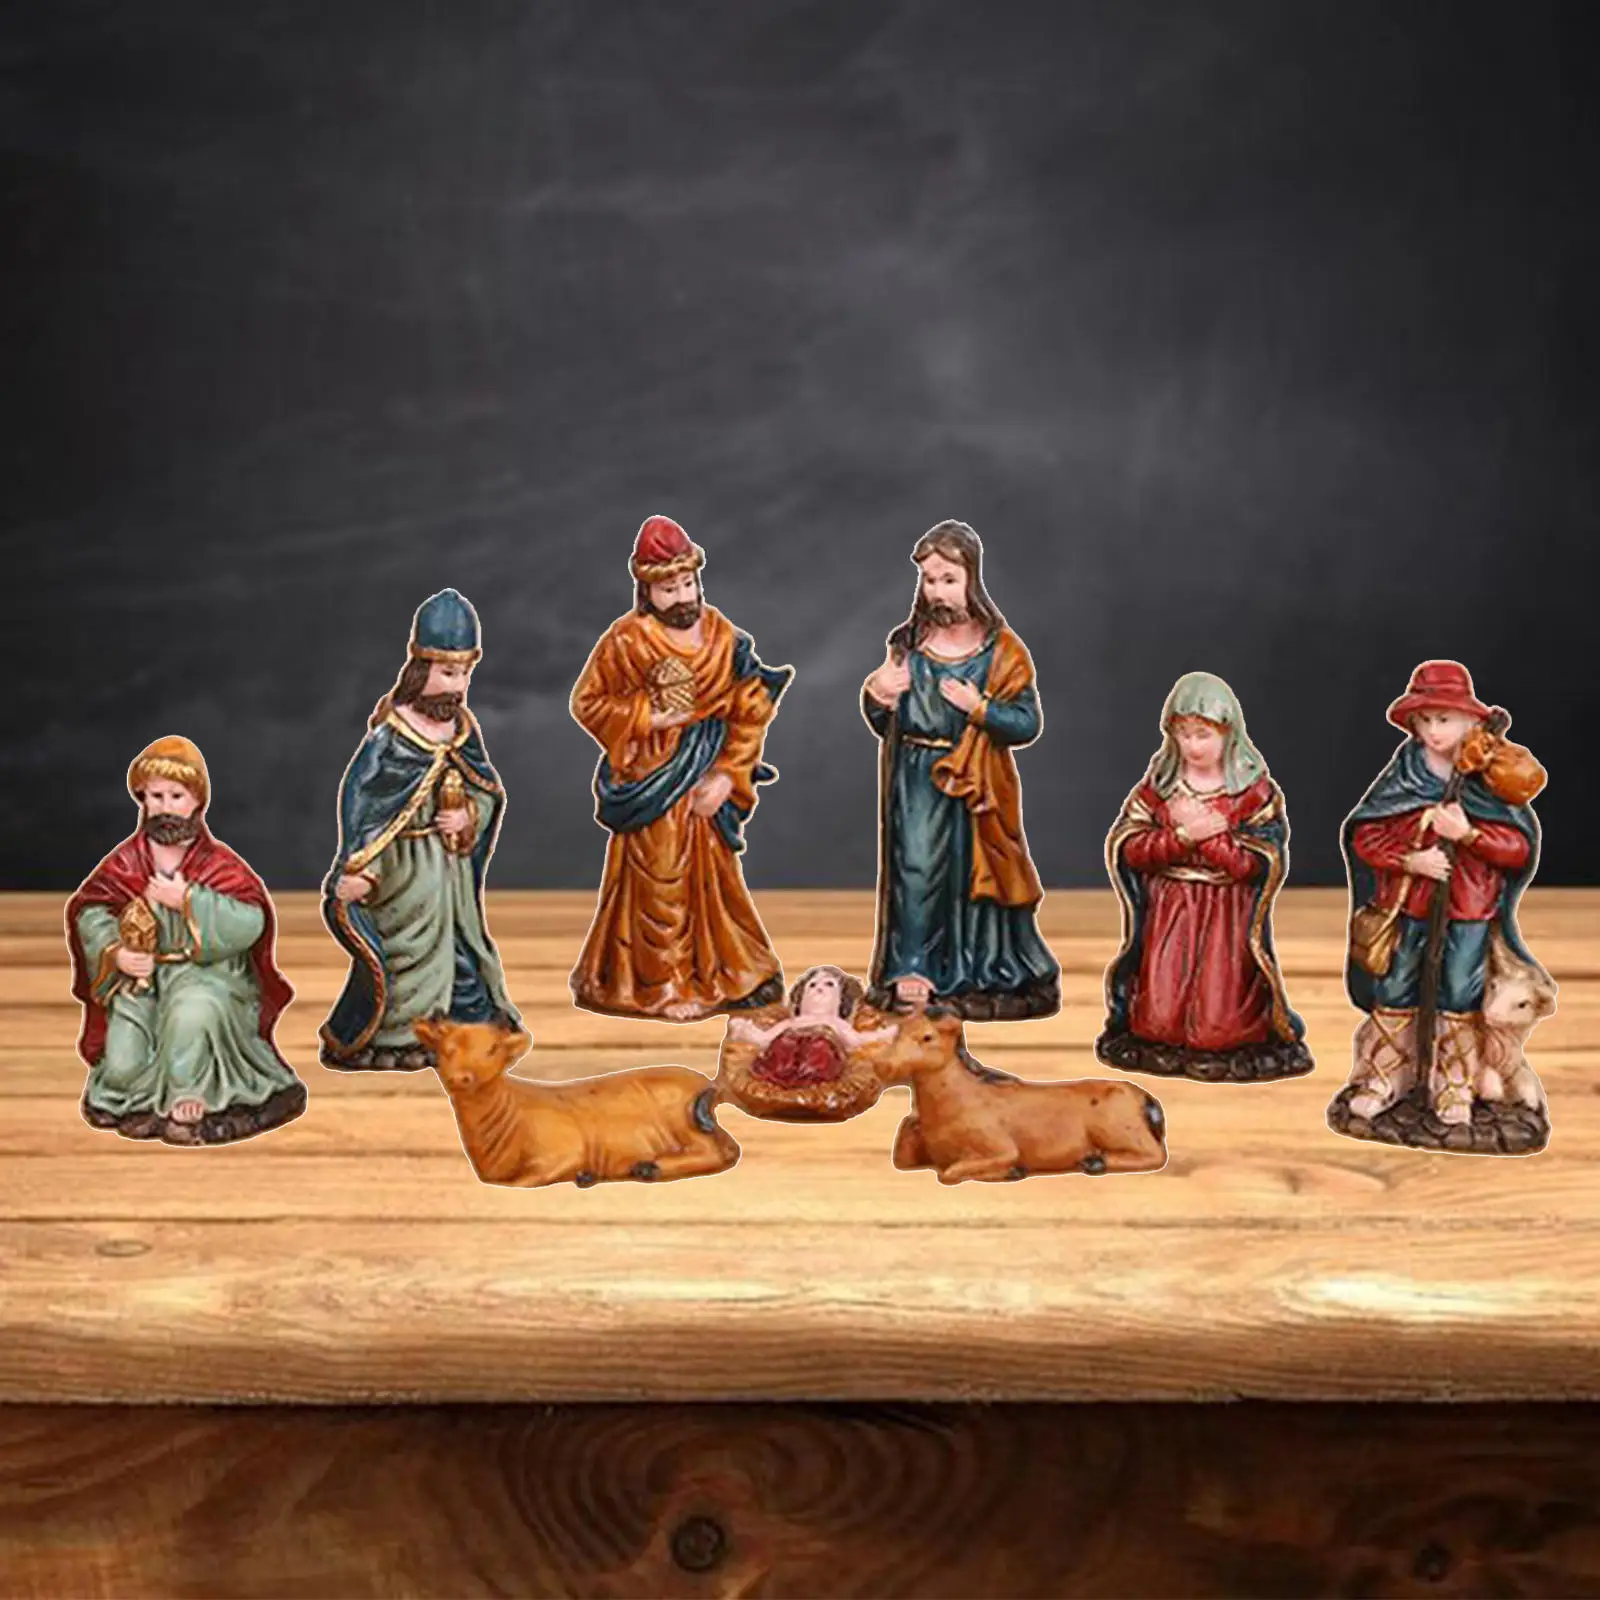 Nativity Scene Set Christmas Ornament Decorations Figurines Mini for Gifts